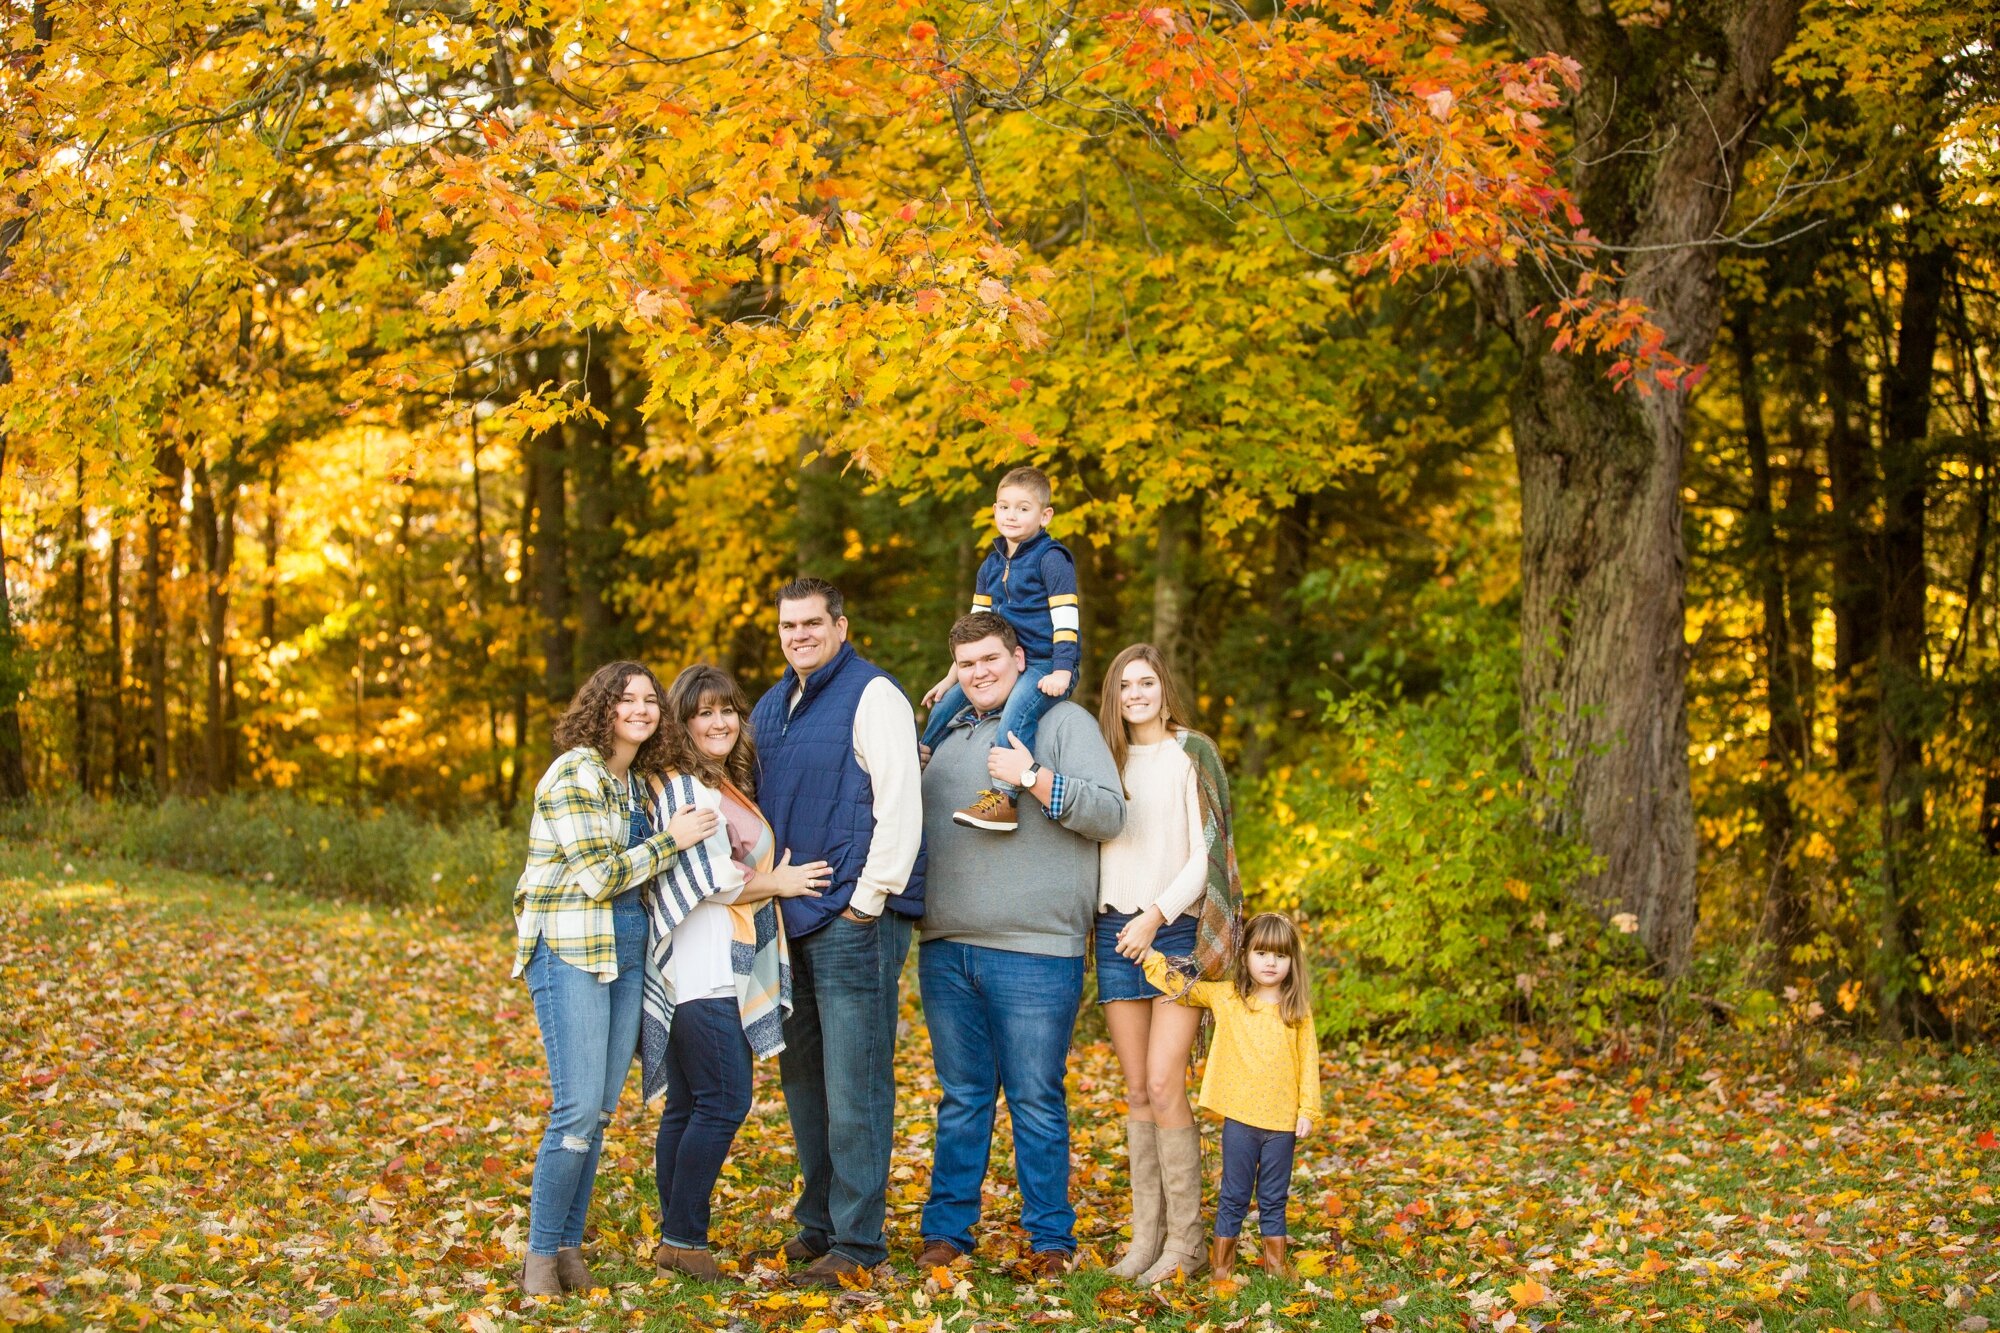 pittsburgh family photographer, mcconnells mill family photos, cranberry township family photographer, location ideas for photo shoot pittsburgh